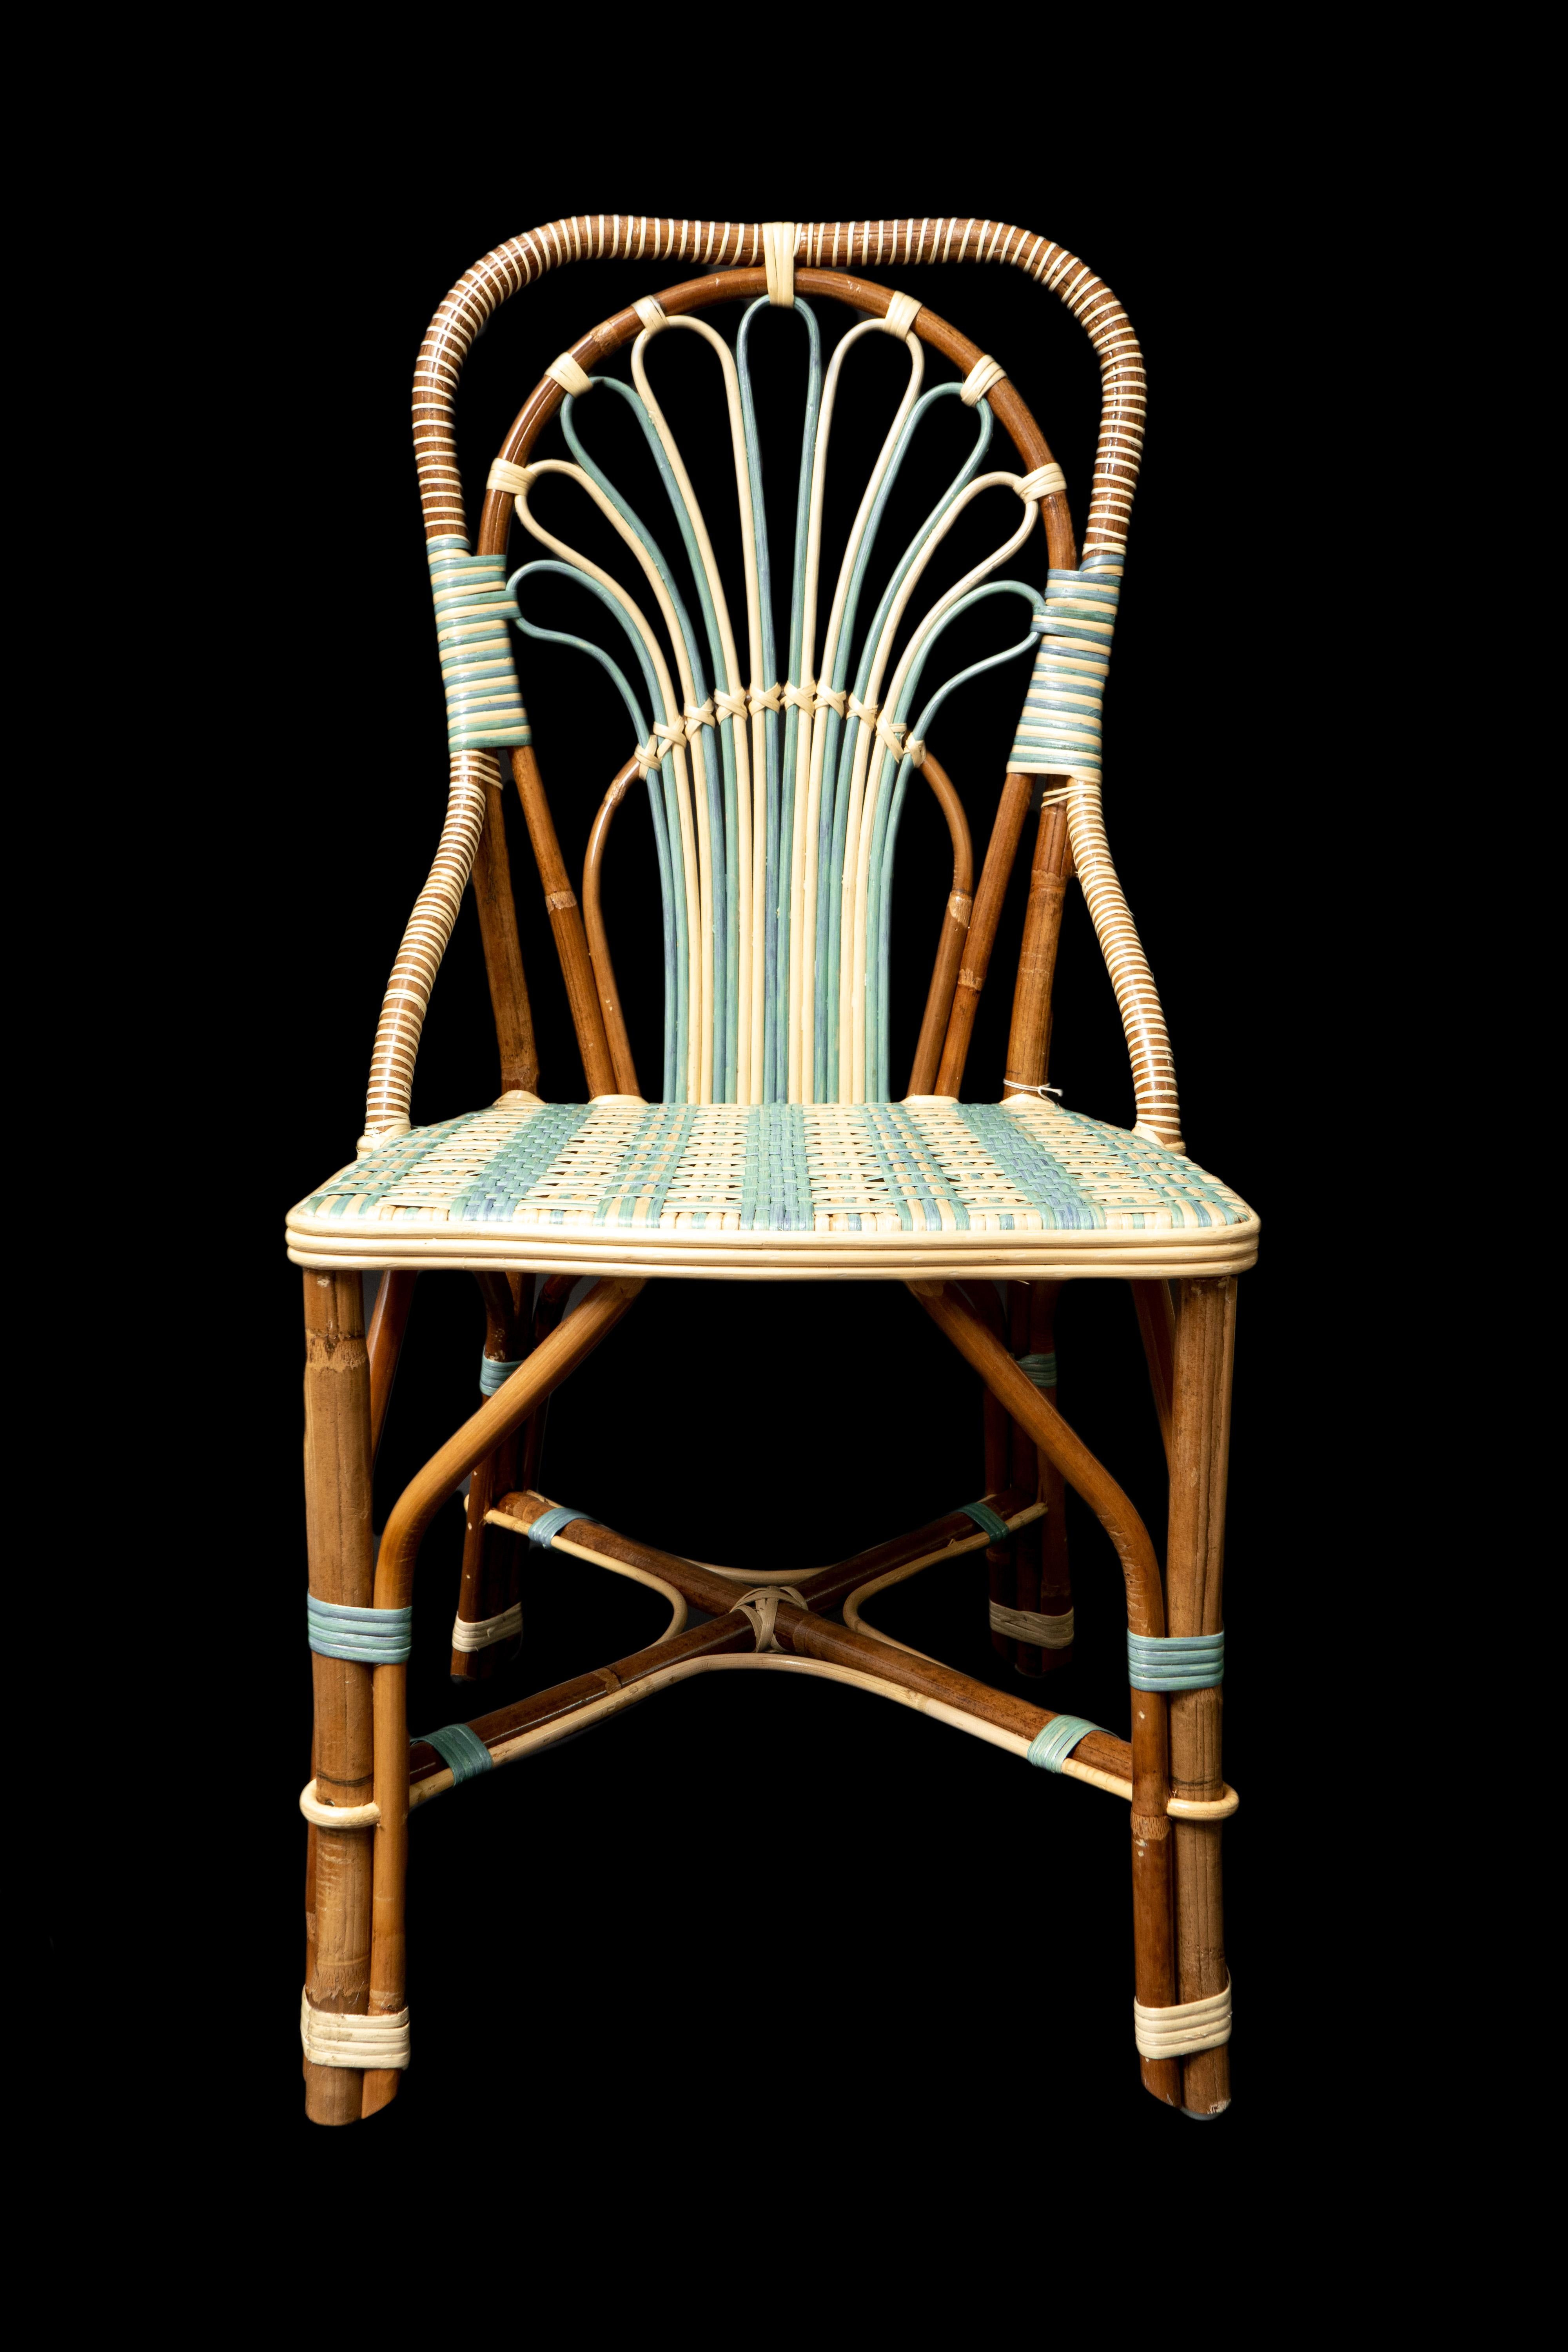 Peacock rattan arm chair. Made exclusively for Creel and Gow in Tangier Morocco.

Measures: 18